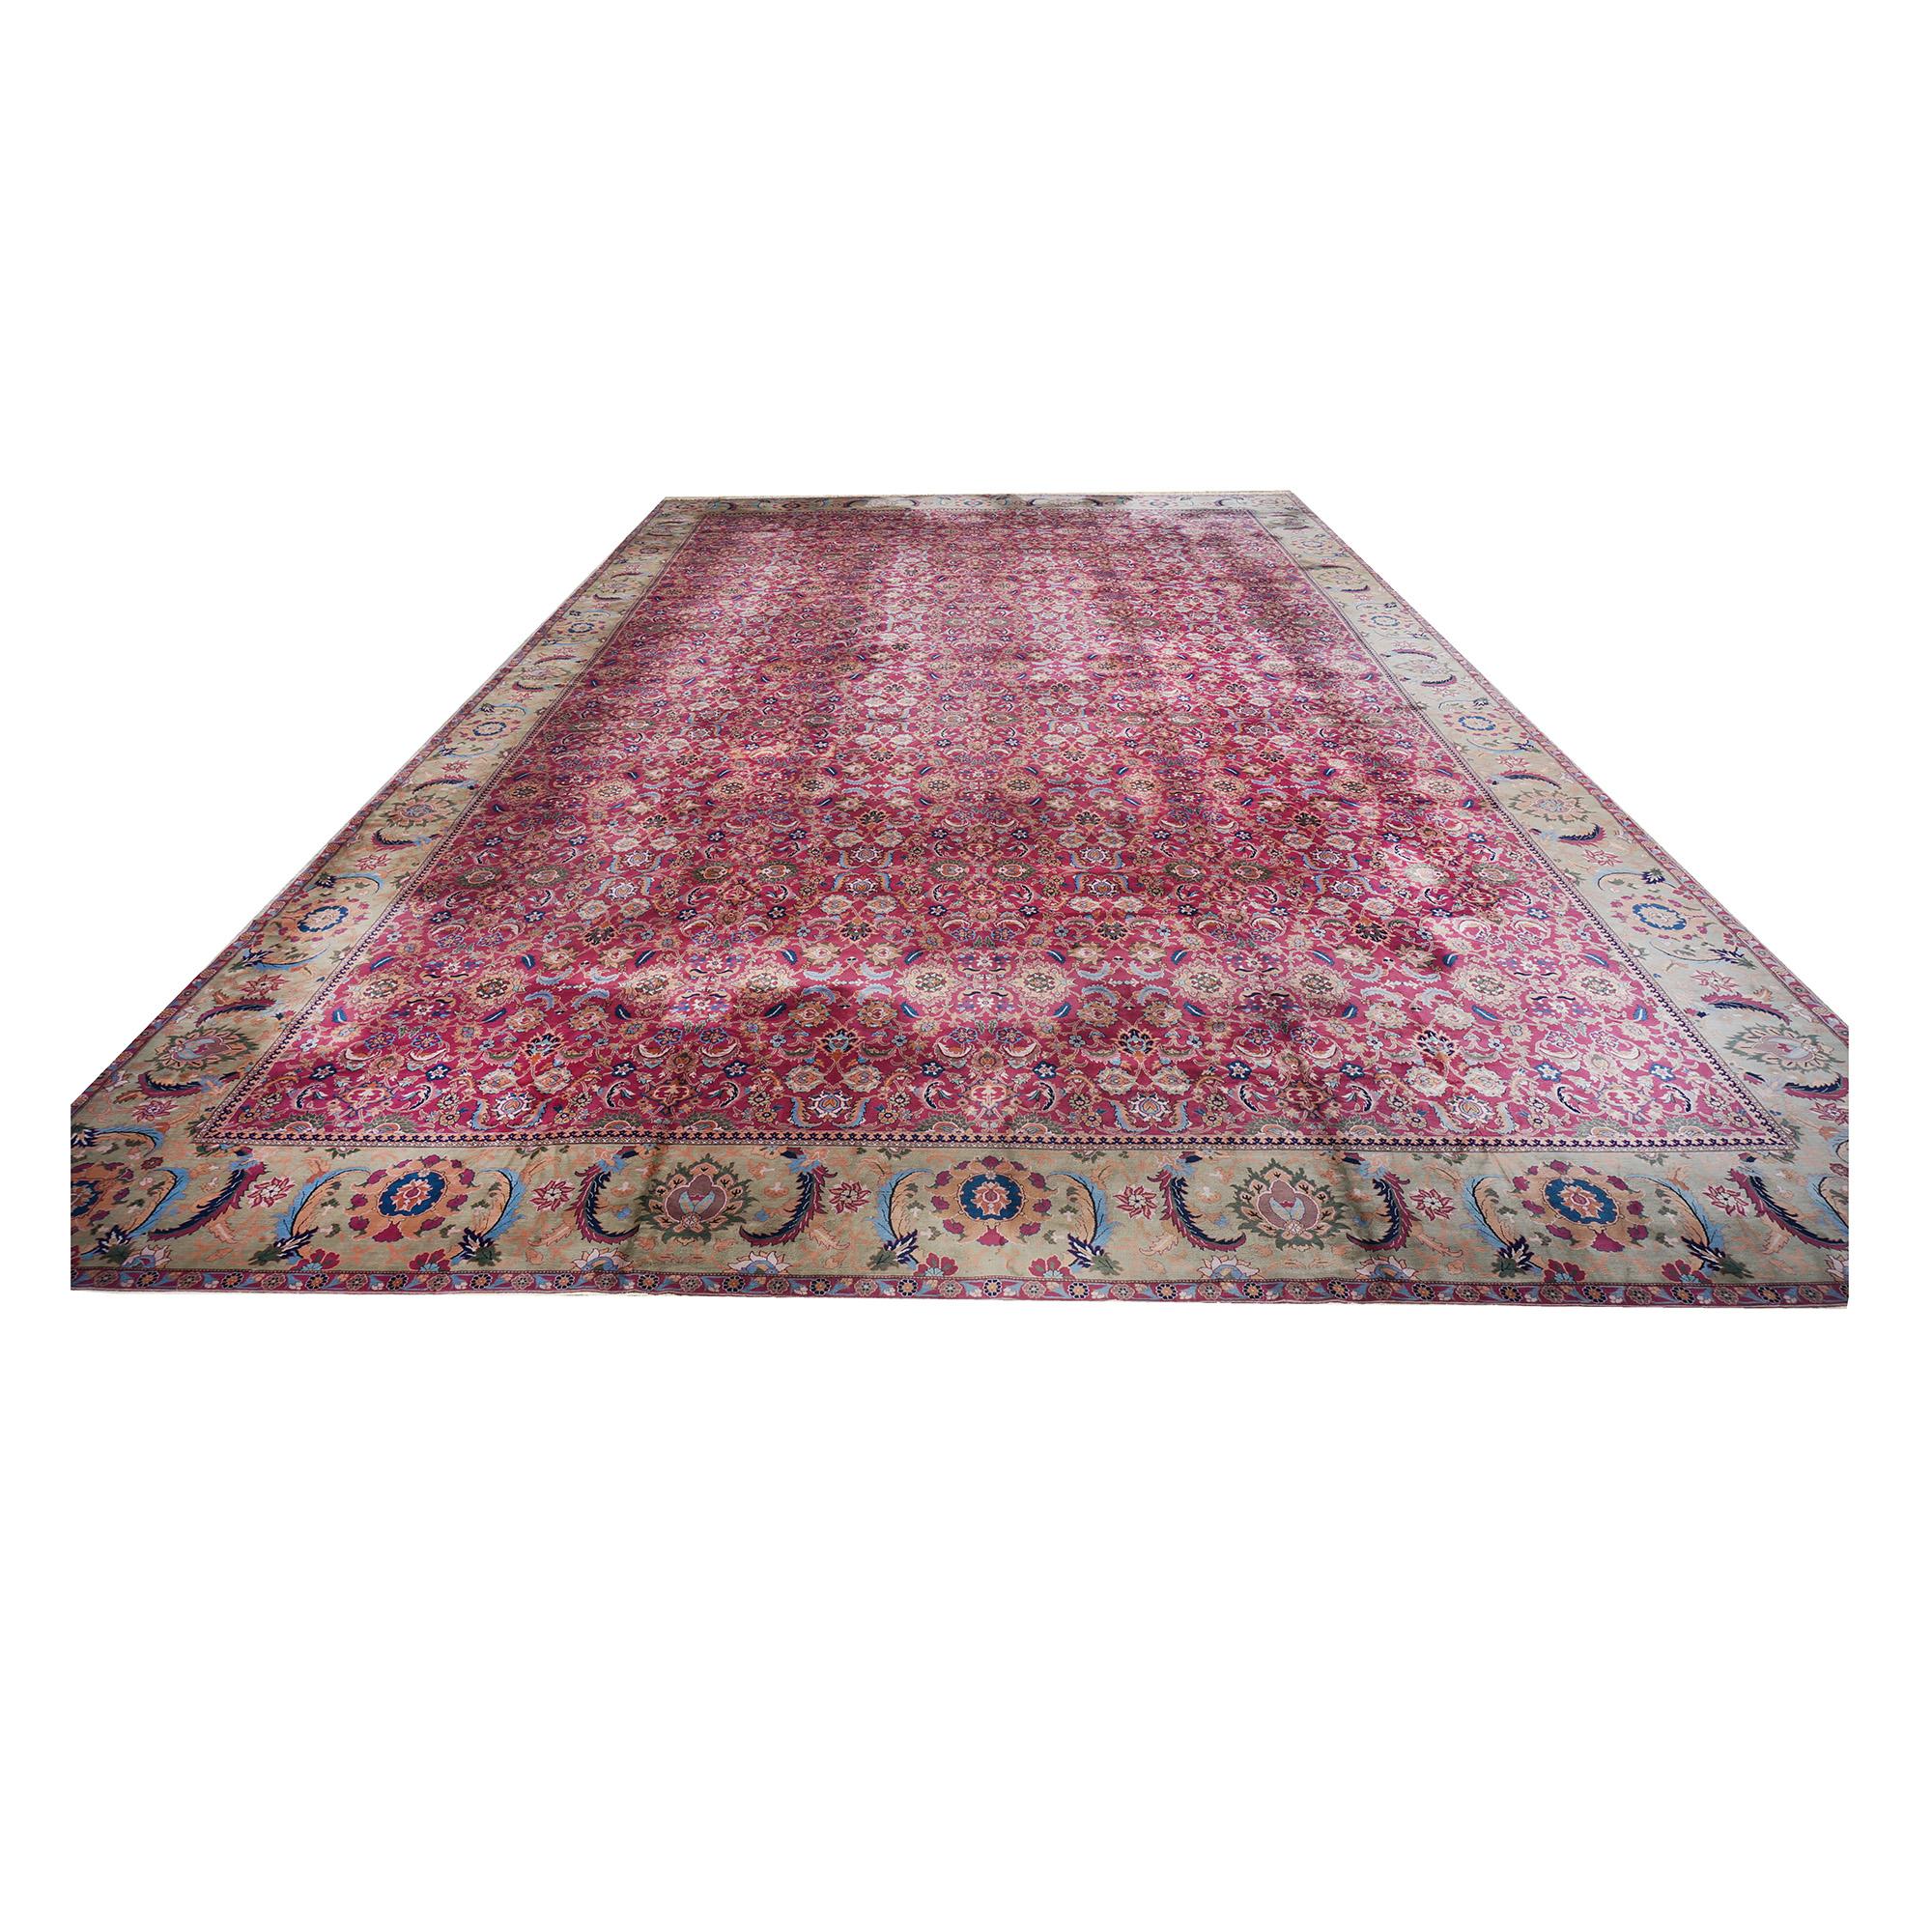 Early 20th Century 26'X42' Palace Sized Antique Laristan Wool Handmade Rug For Sale 2